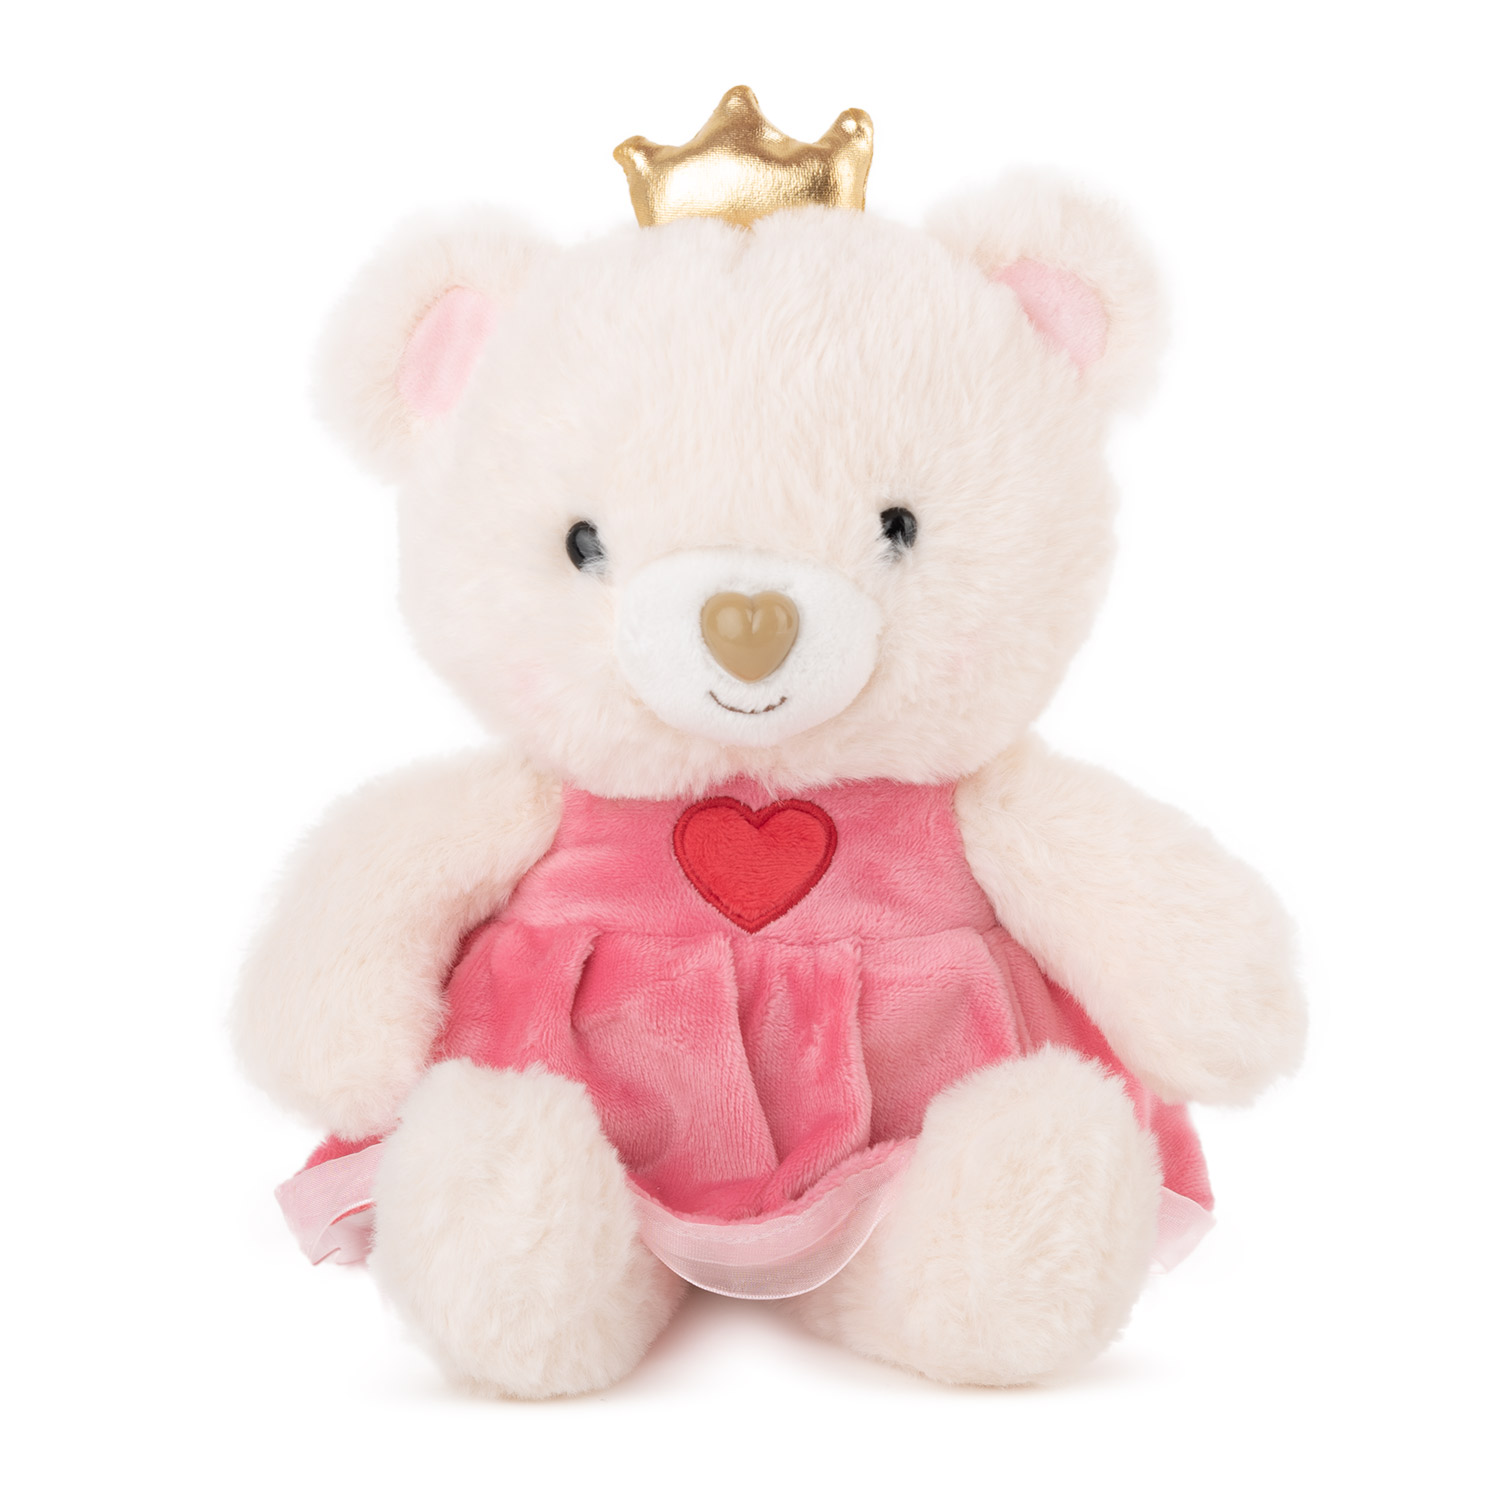 Bear with dress and crown